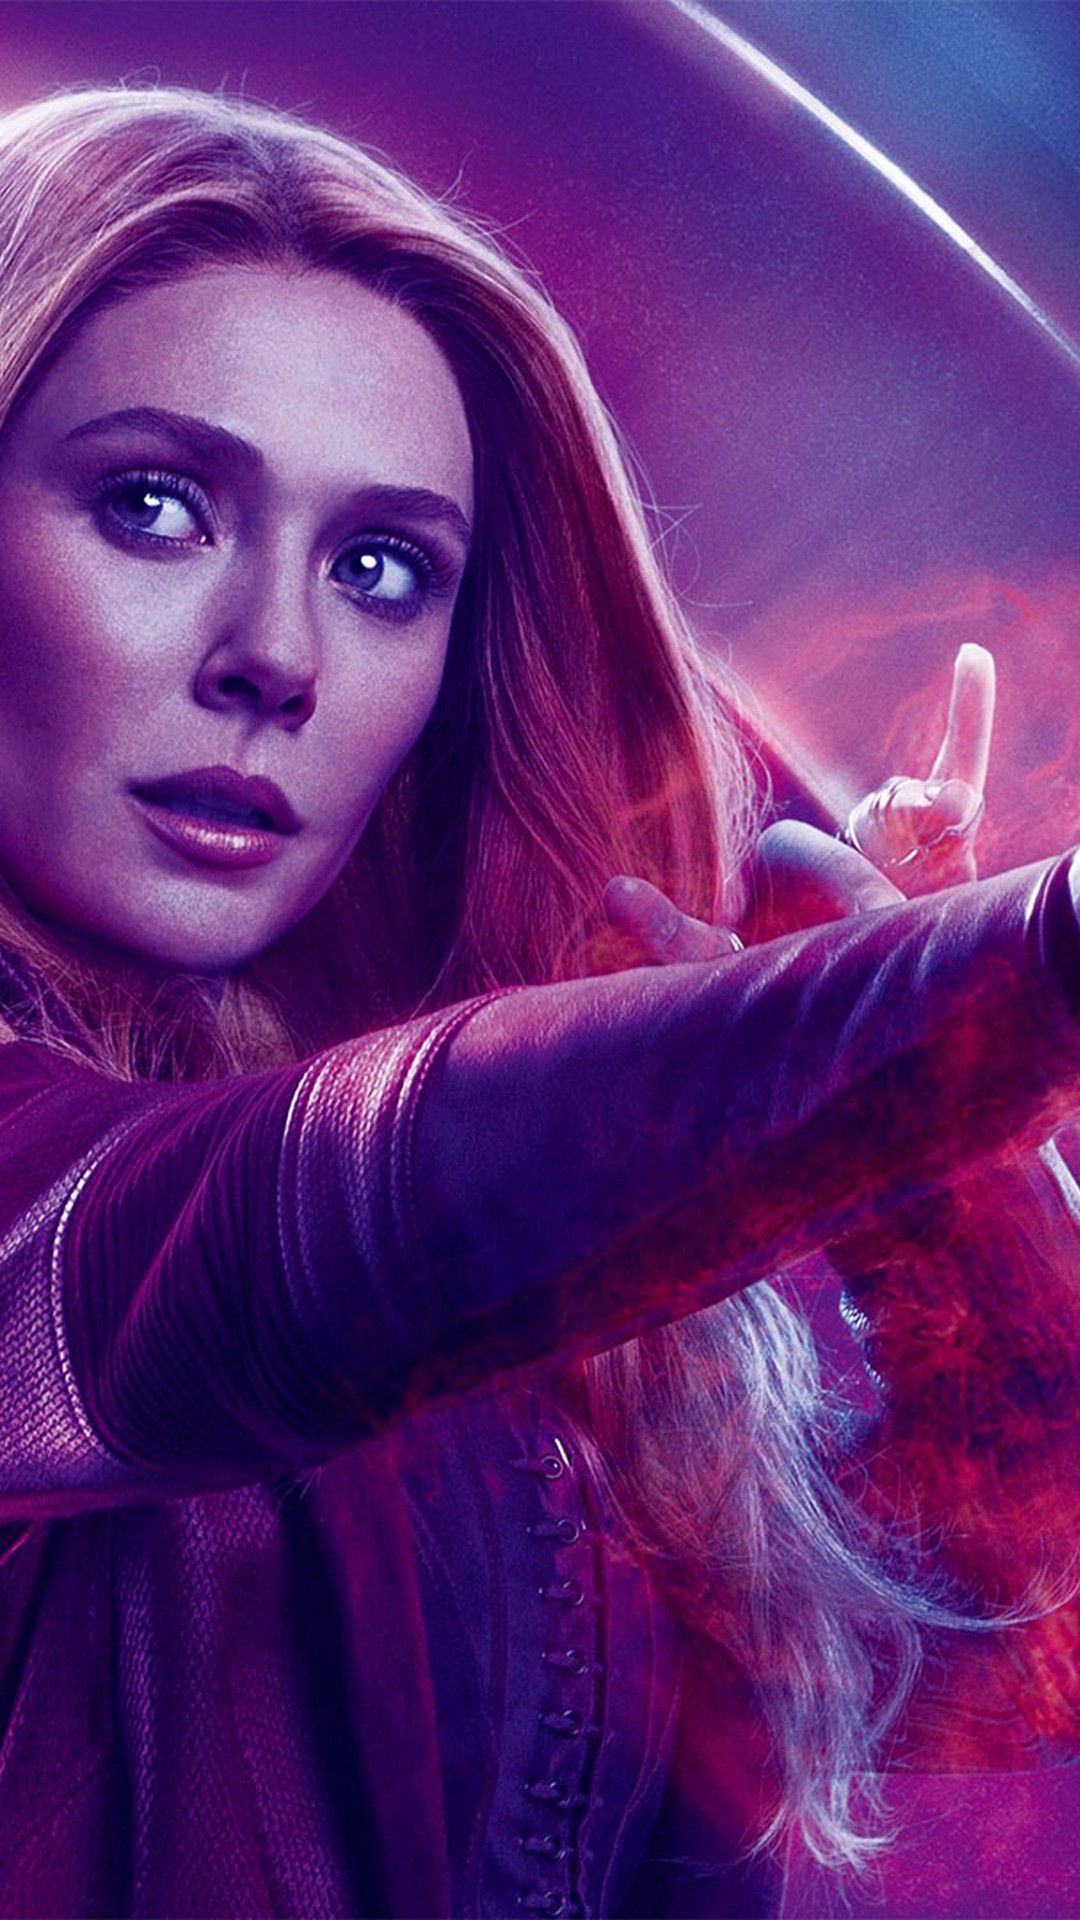 Scarlet Witch Avengers Endgame iPhone Wallpaper Movie Poster Wallpaper HD